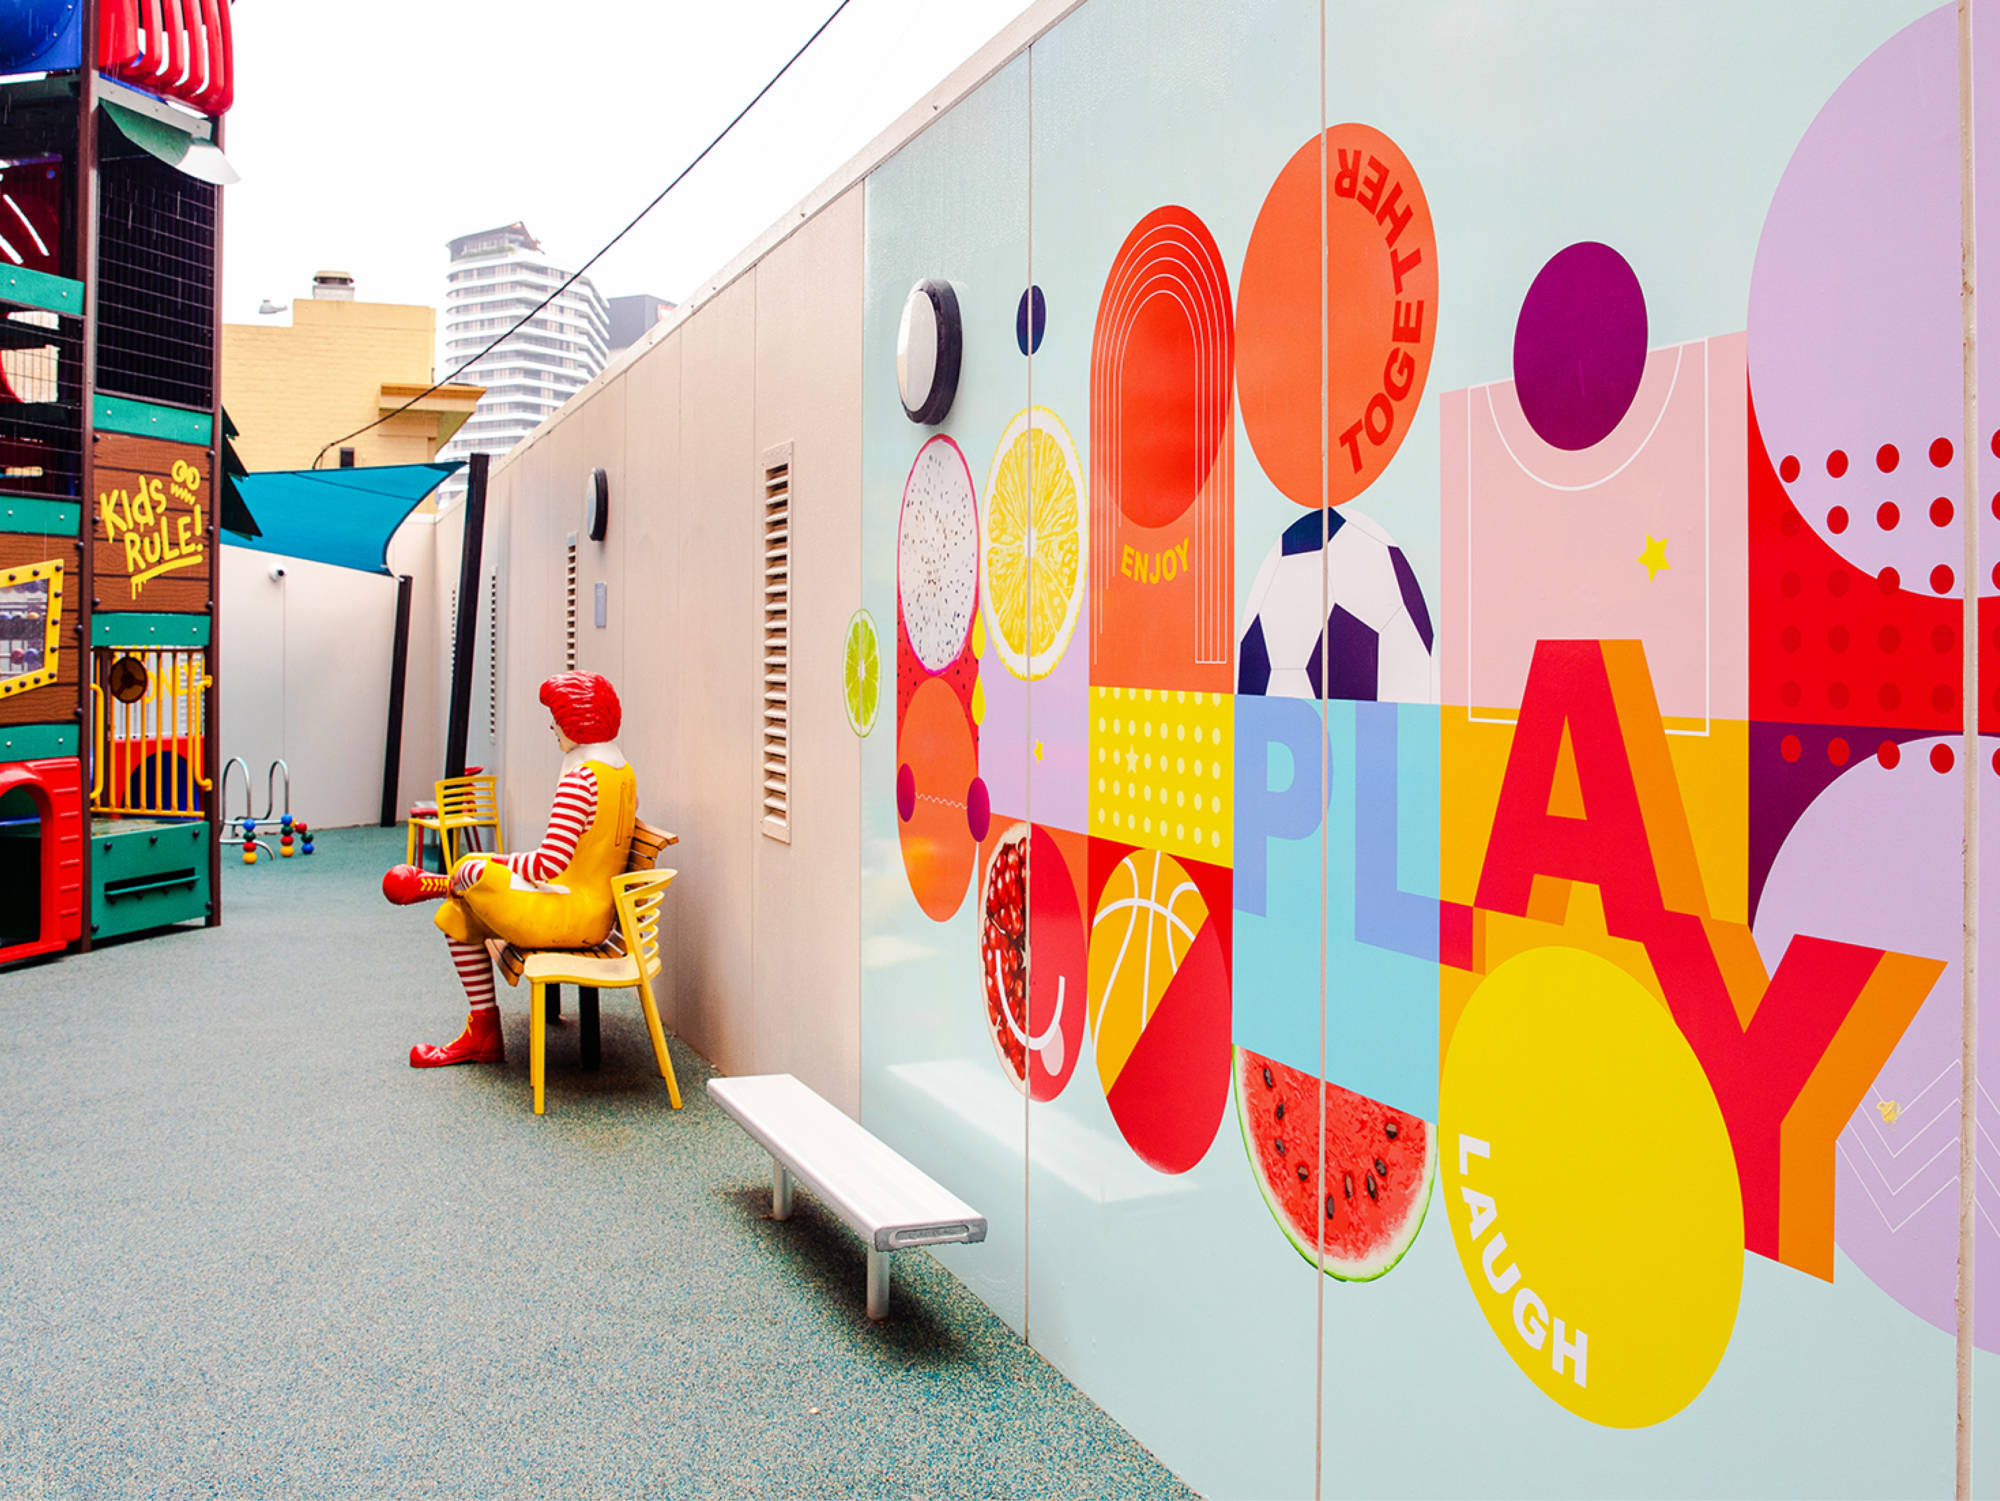 Ronald McDonald House Charities Playground Mural designed by DAIS Brand Strategy Advisors